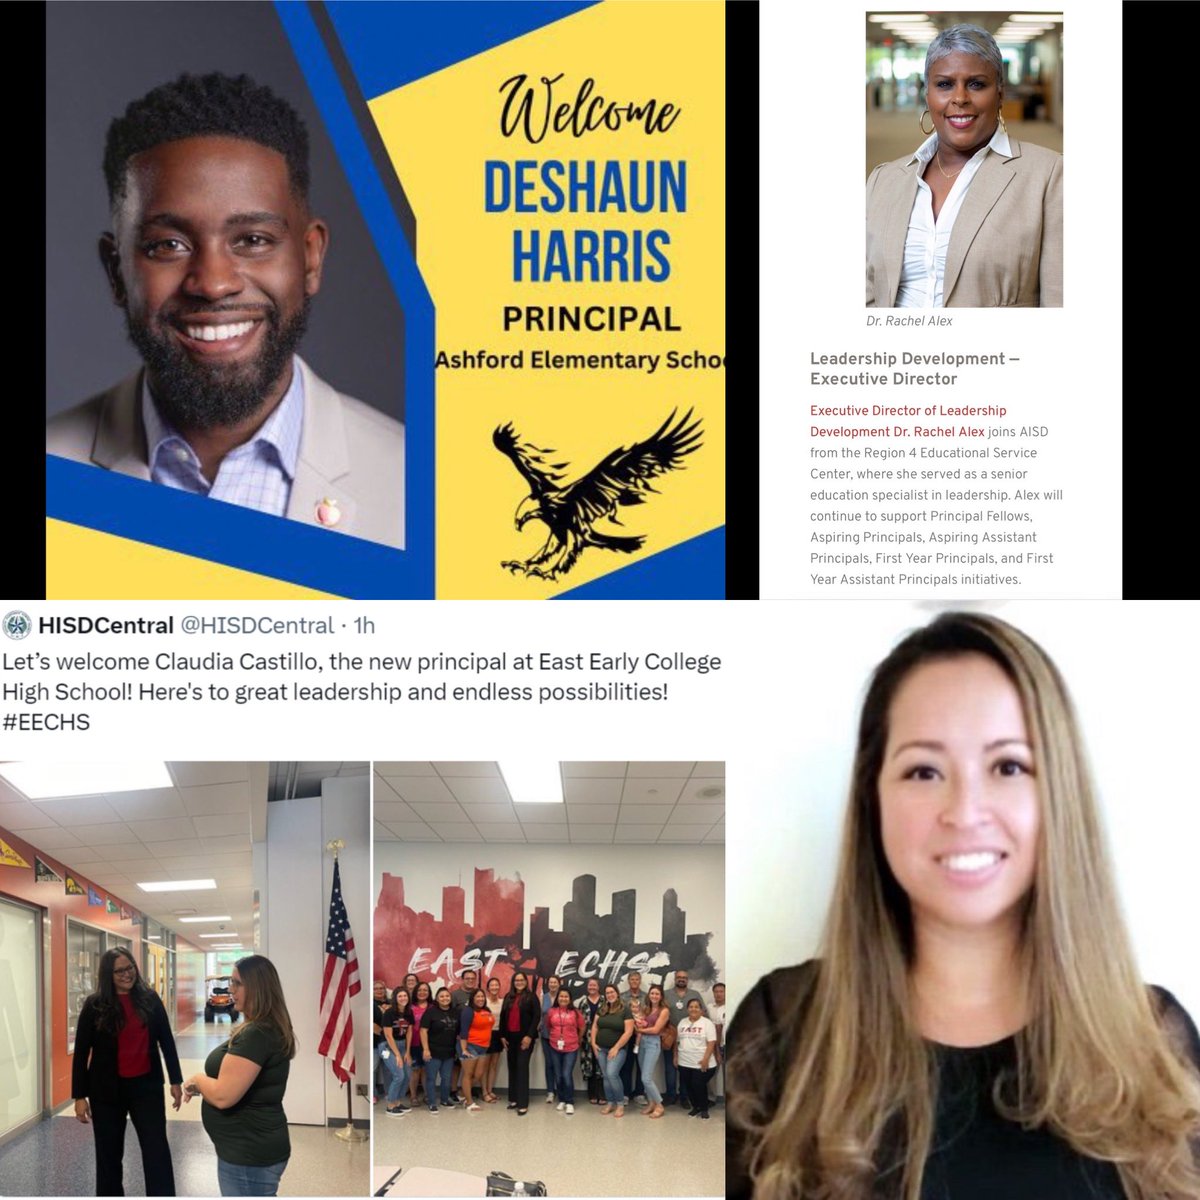 Hi - Congrats to our current and former doctoral students for their promotions! Doctoral Program in Educational Leadership - @UHClearLake @Mr_DDHarris @drrachelalex @CisnerosSandra0 linkedin.com/posts/doctor-c…